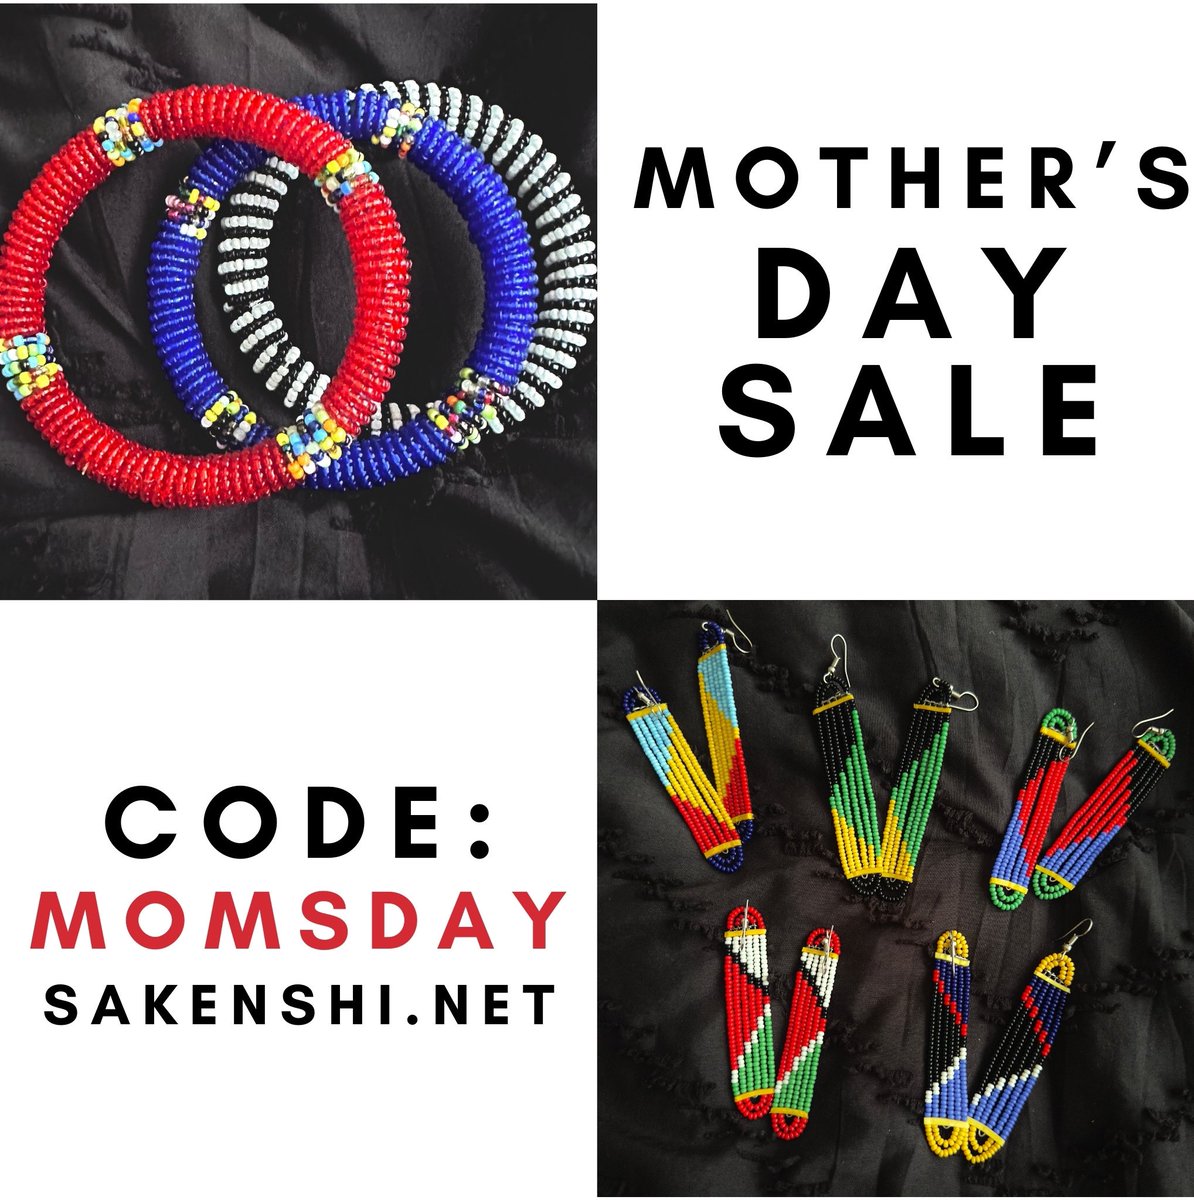 Check out these new jewelry items in my shop sakenshi.net

Use code MOMSDAY to get 20% off of orders

#BlackOwned #BlackOwnedBusiness #jewelry